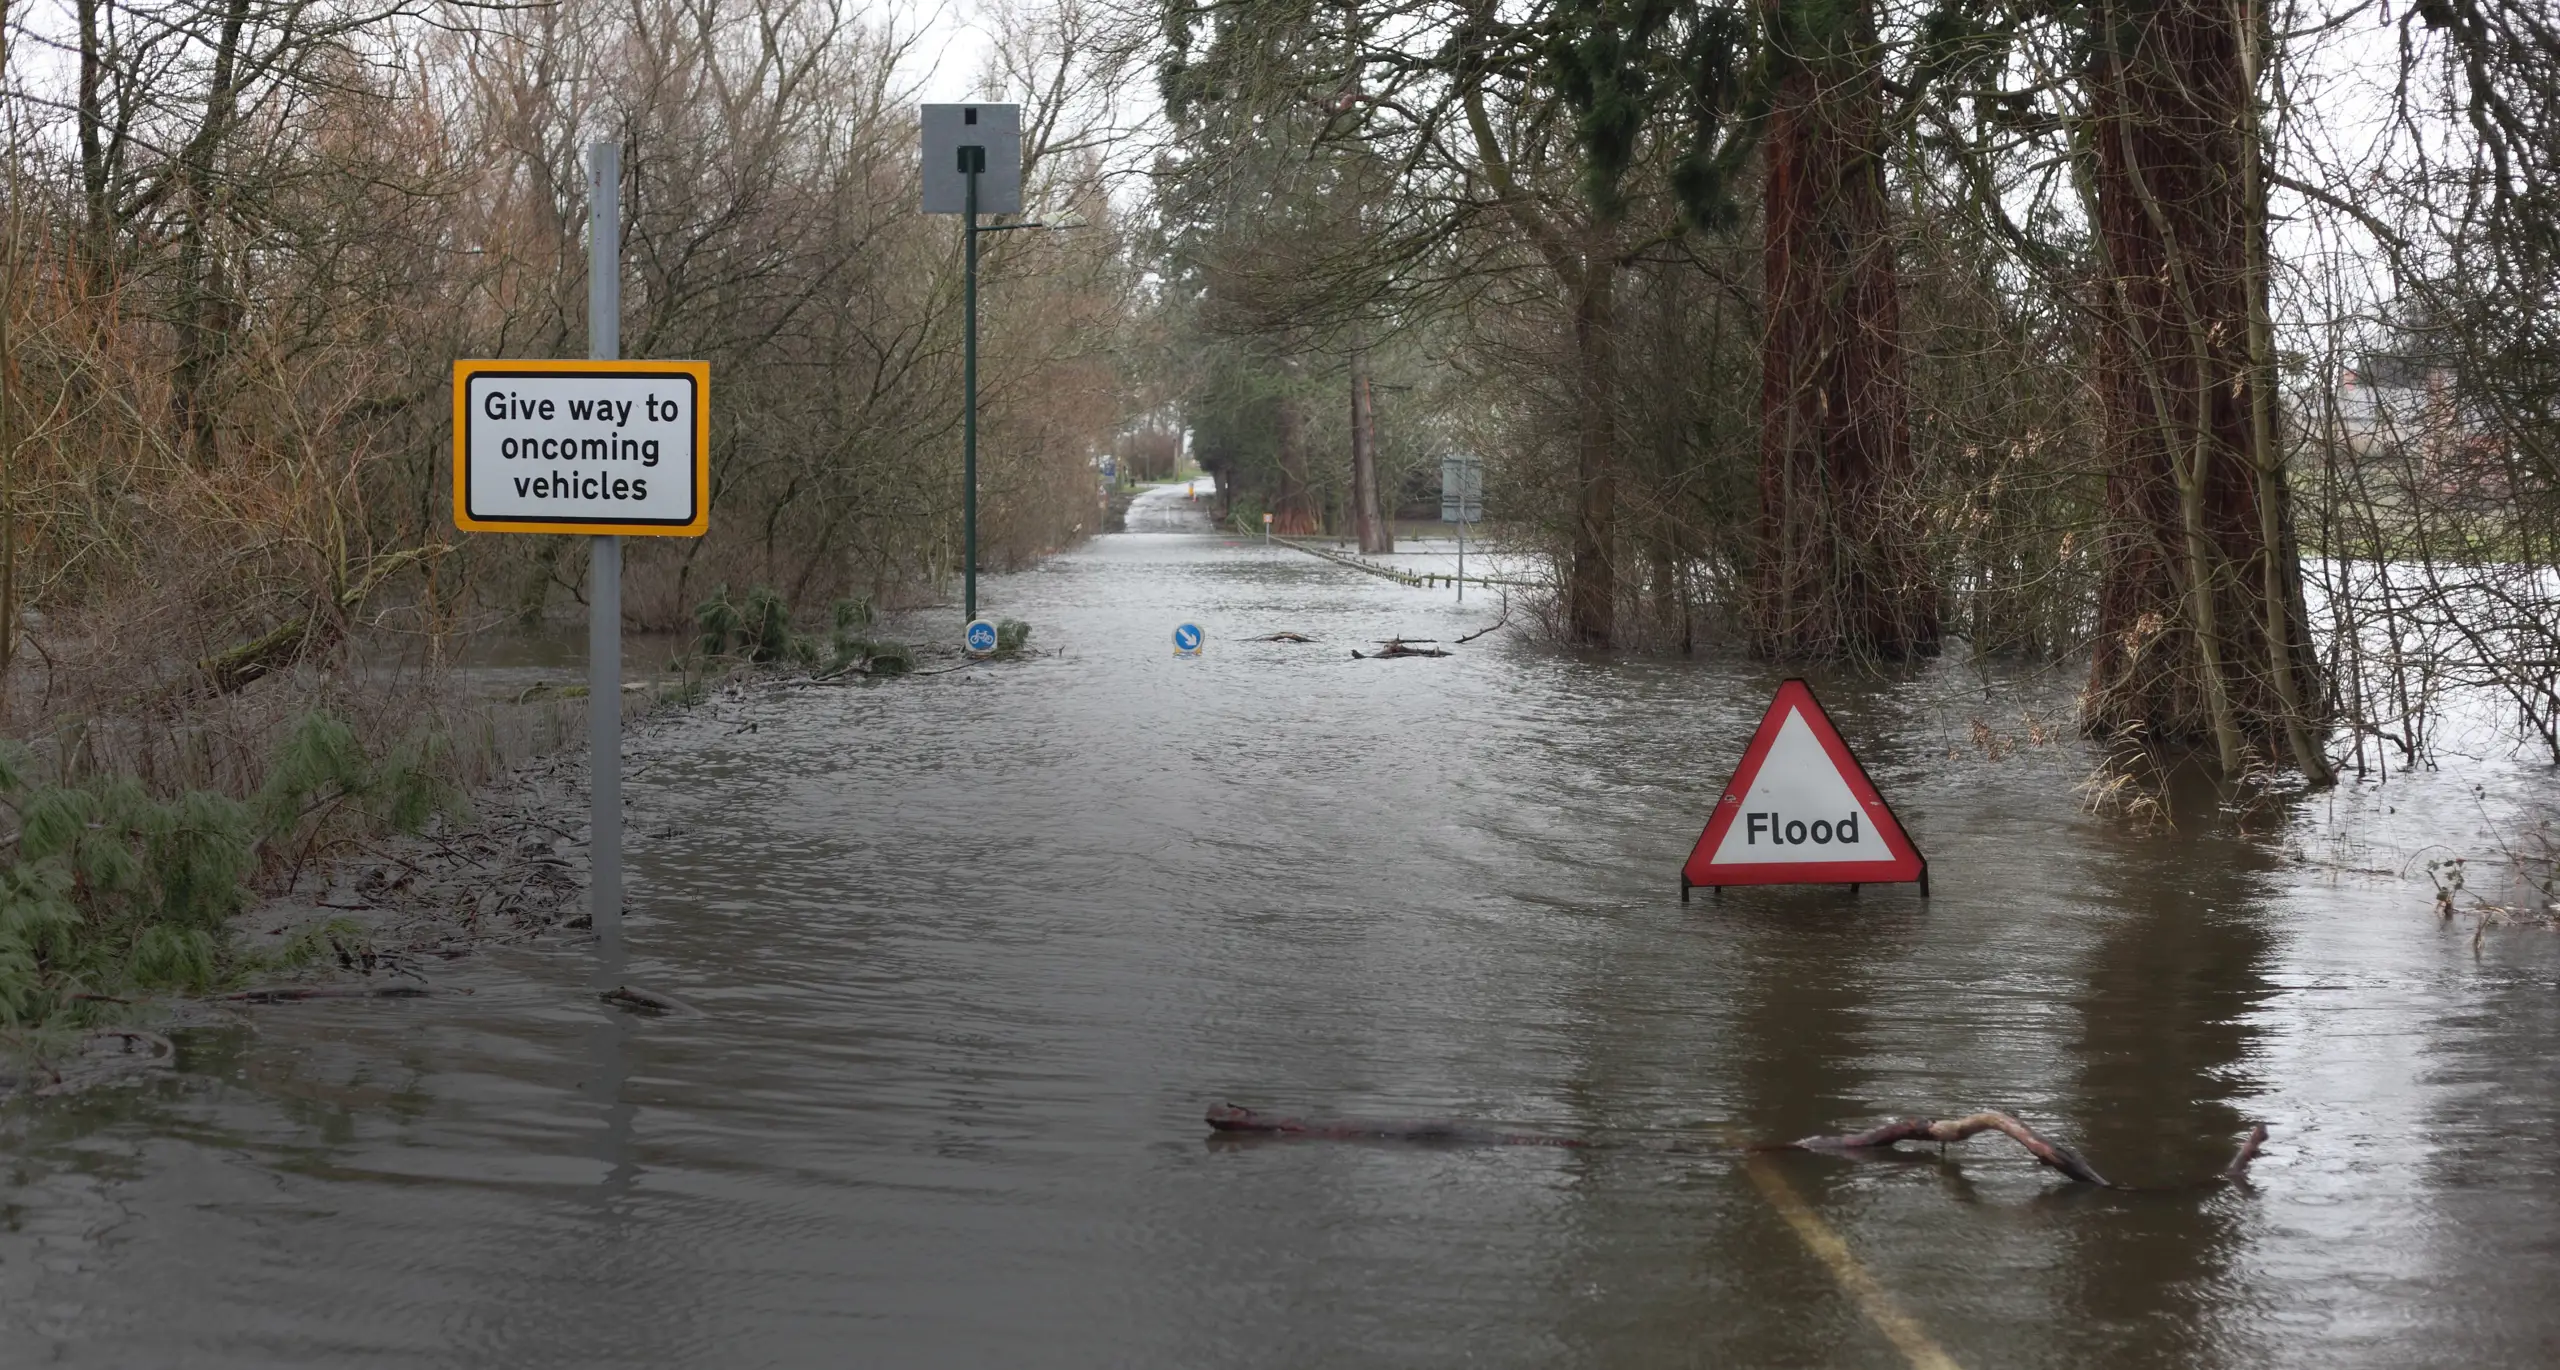 Flood risk and drainage